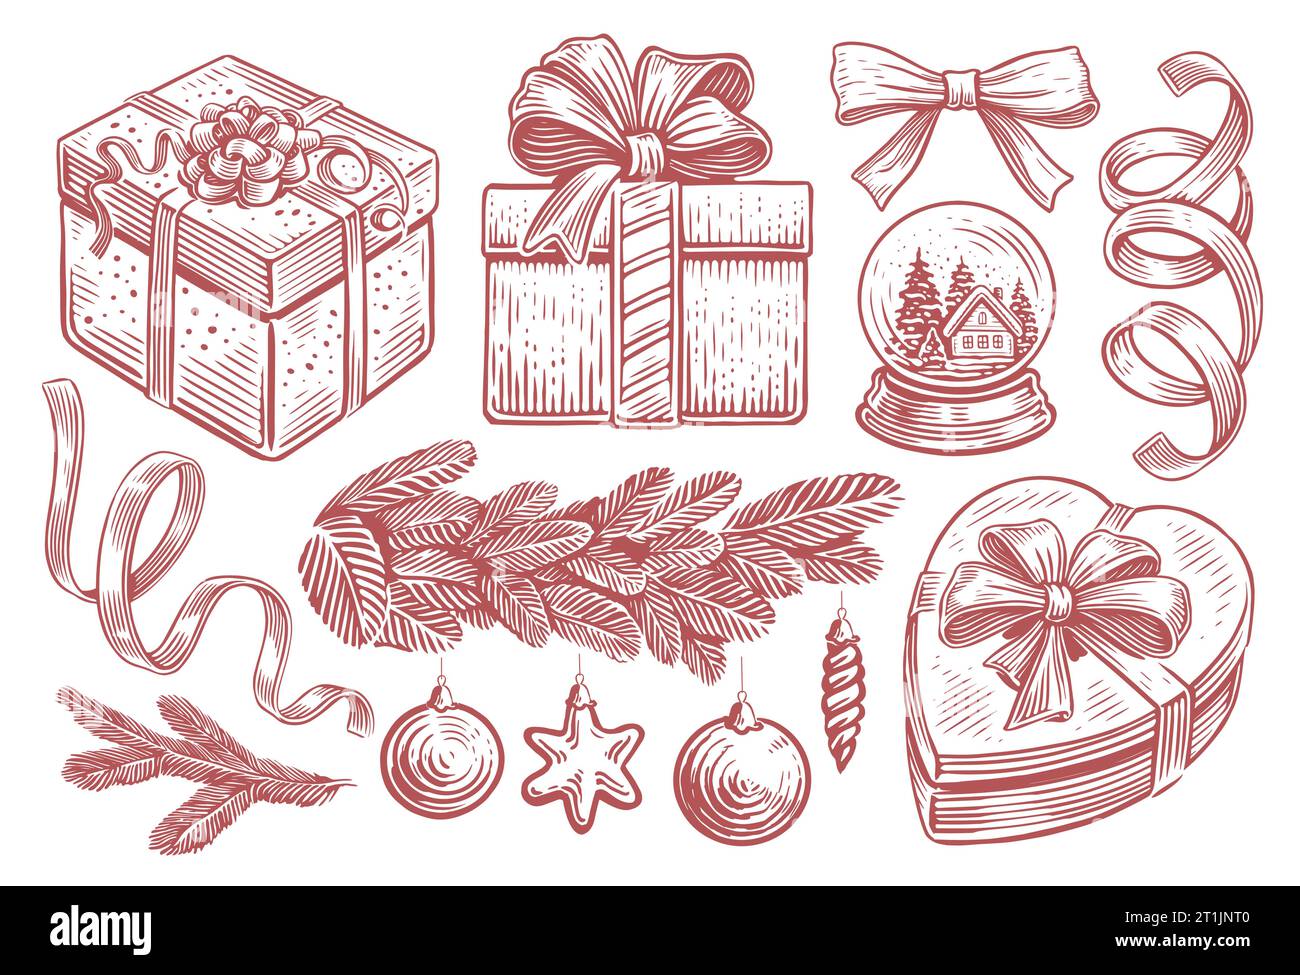 Set of hand drawn retro items for the Christmas holiday. Hand drawn vintage sketch vector illustration Stock Vector